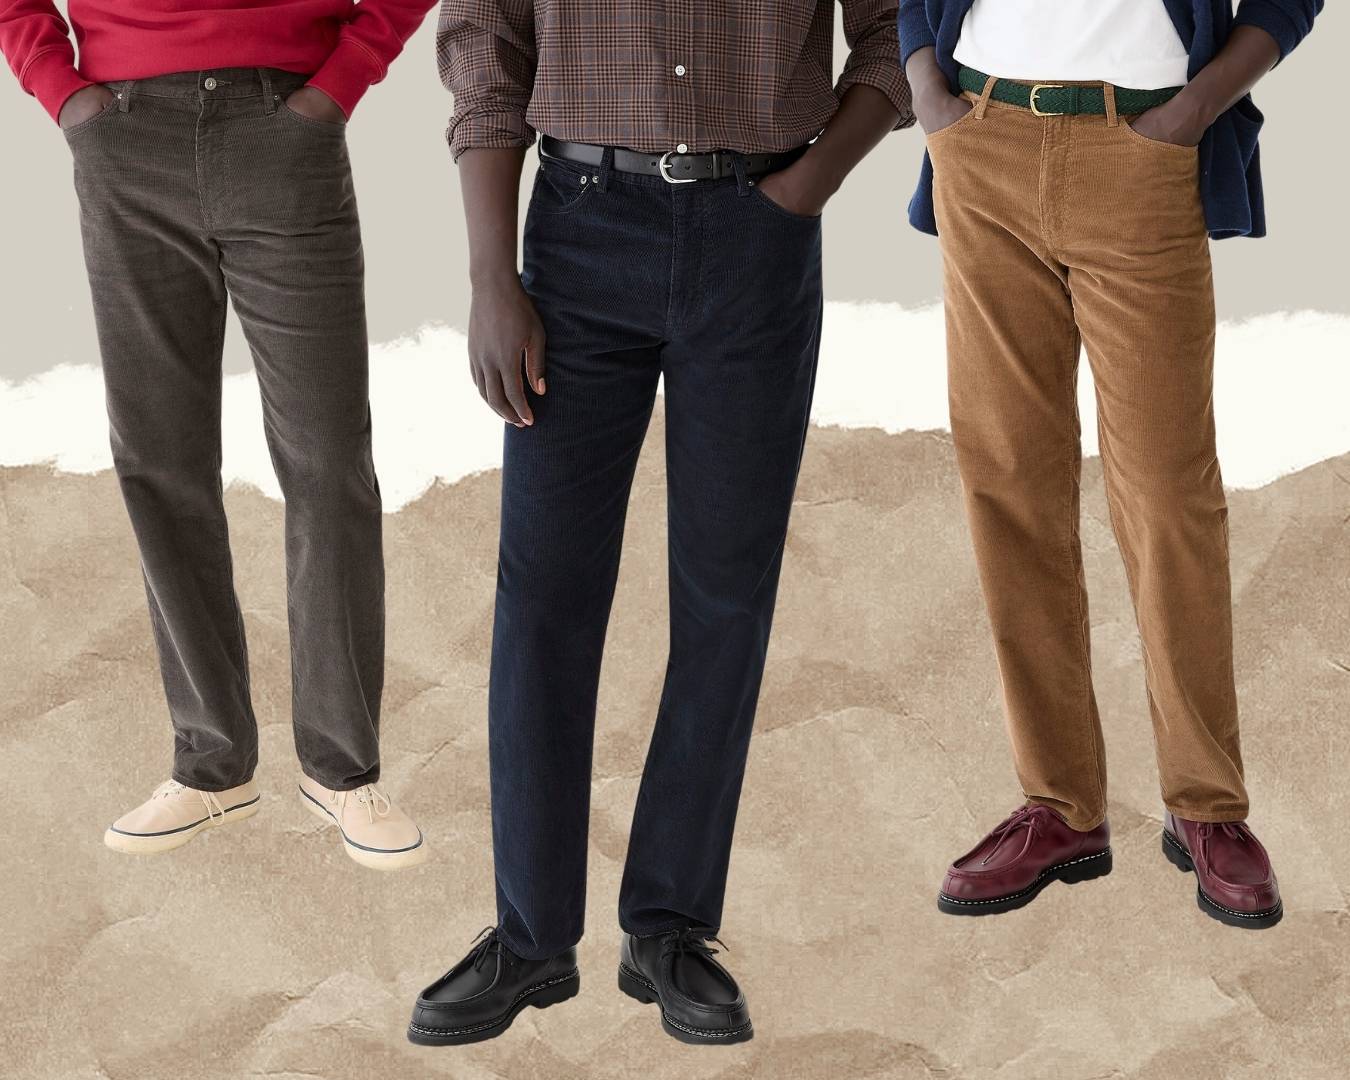 The Best & Most Stylish Winter Pants for Men (8 Great Options)